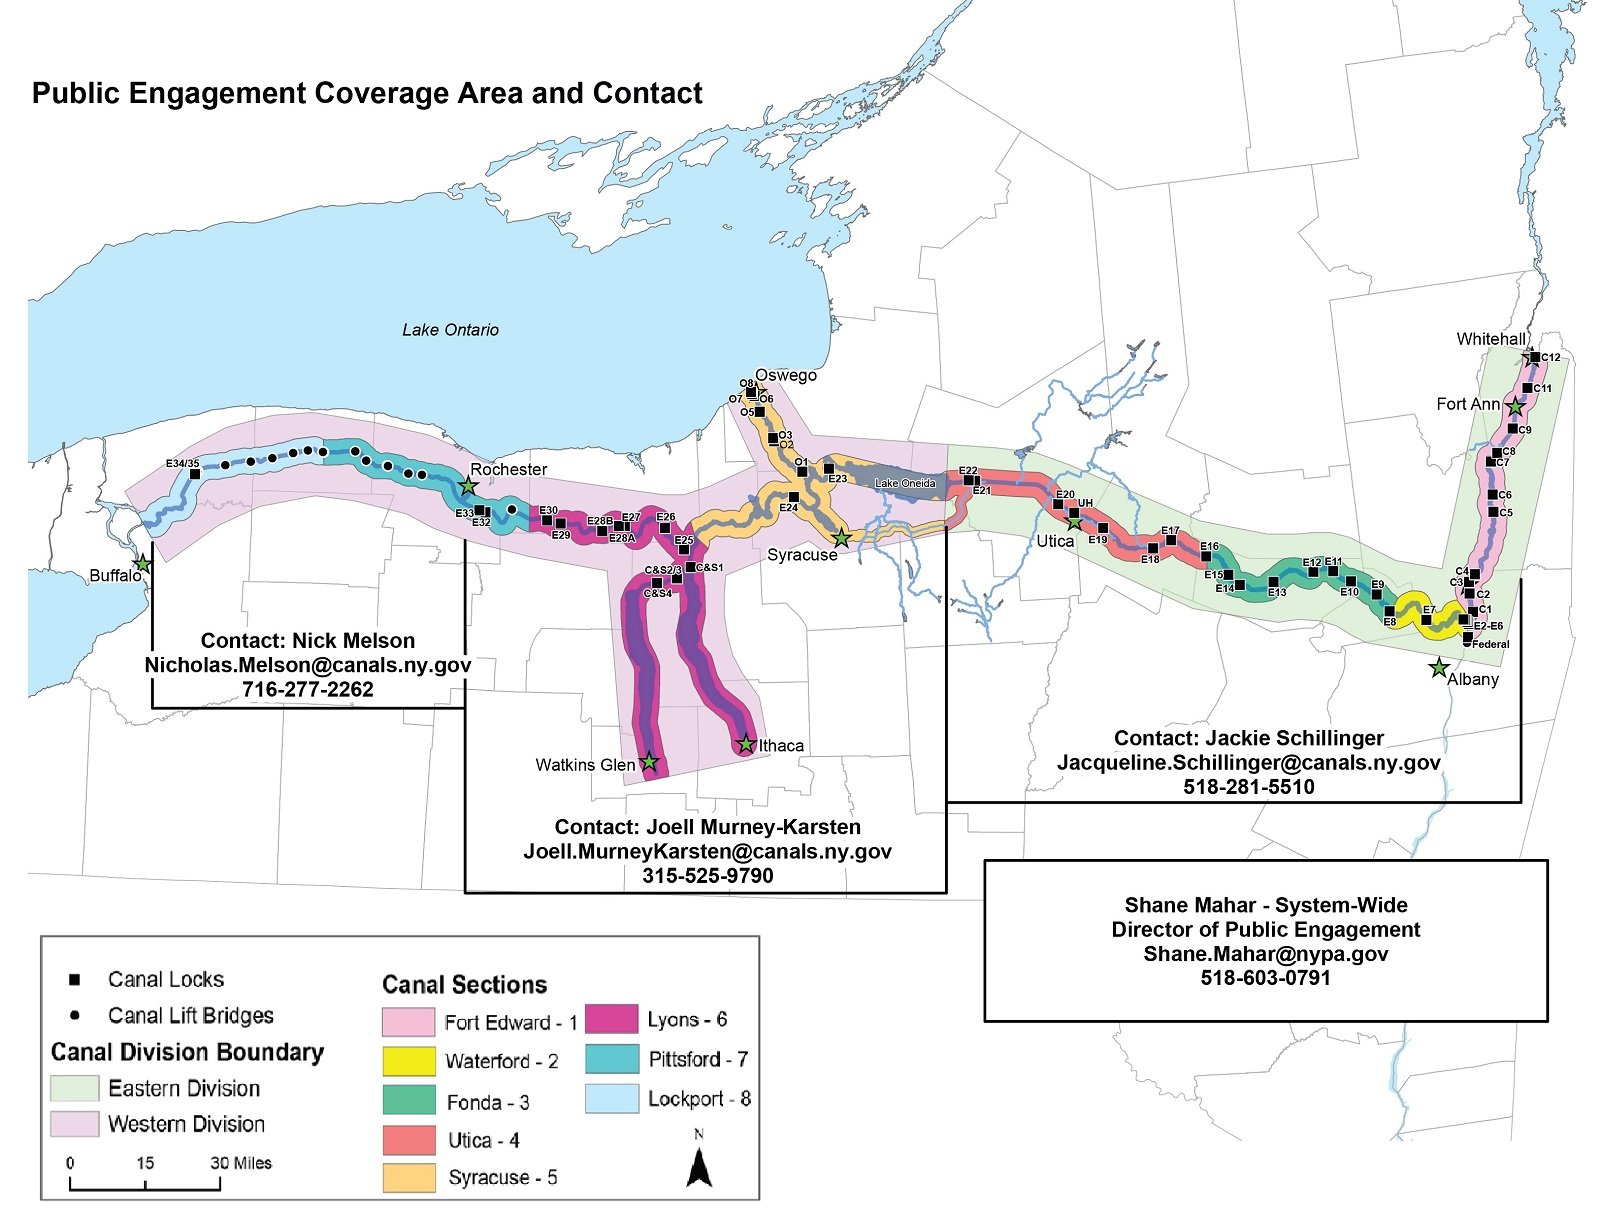 A map of New York State displays the coverage area of public engagement for the canal system. Various colored sections indicate different divisions and canal sections. Contact information for public engagement representatives is provided for different regions.